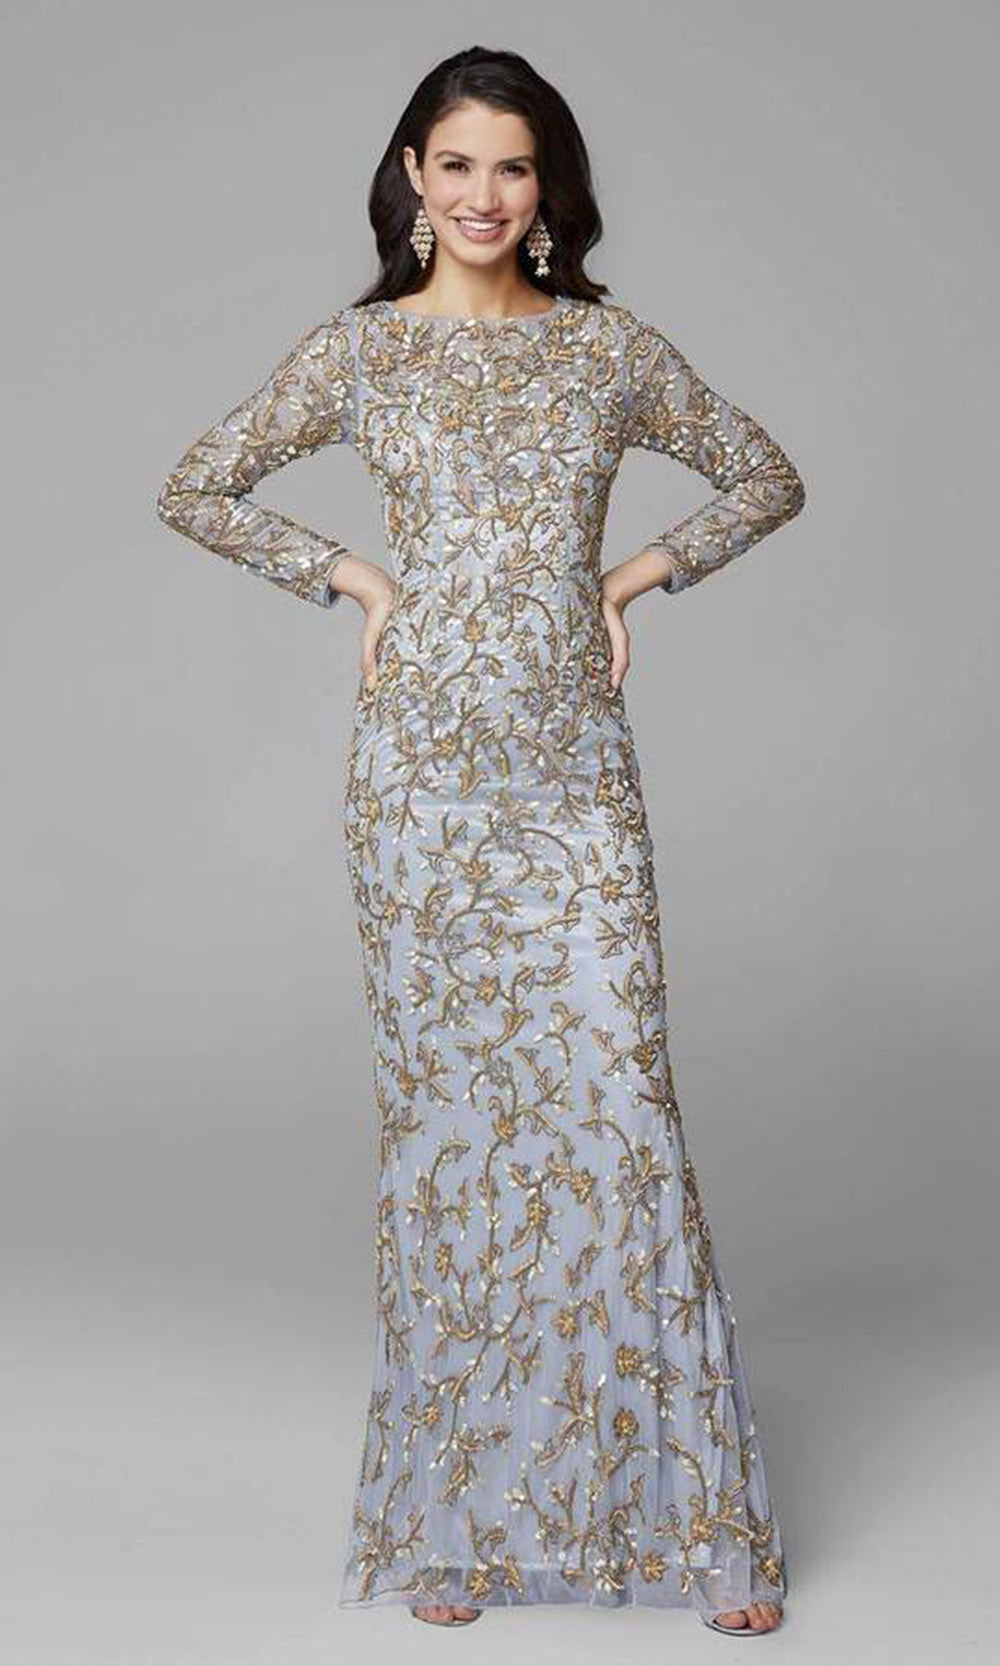 Primavera Couture - Ornate Long Sleeves Sheath Dress In Silver and Brown